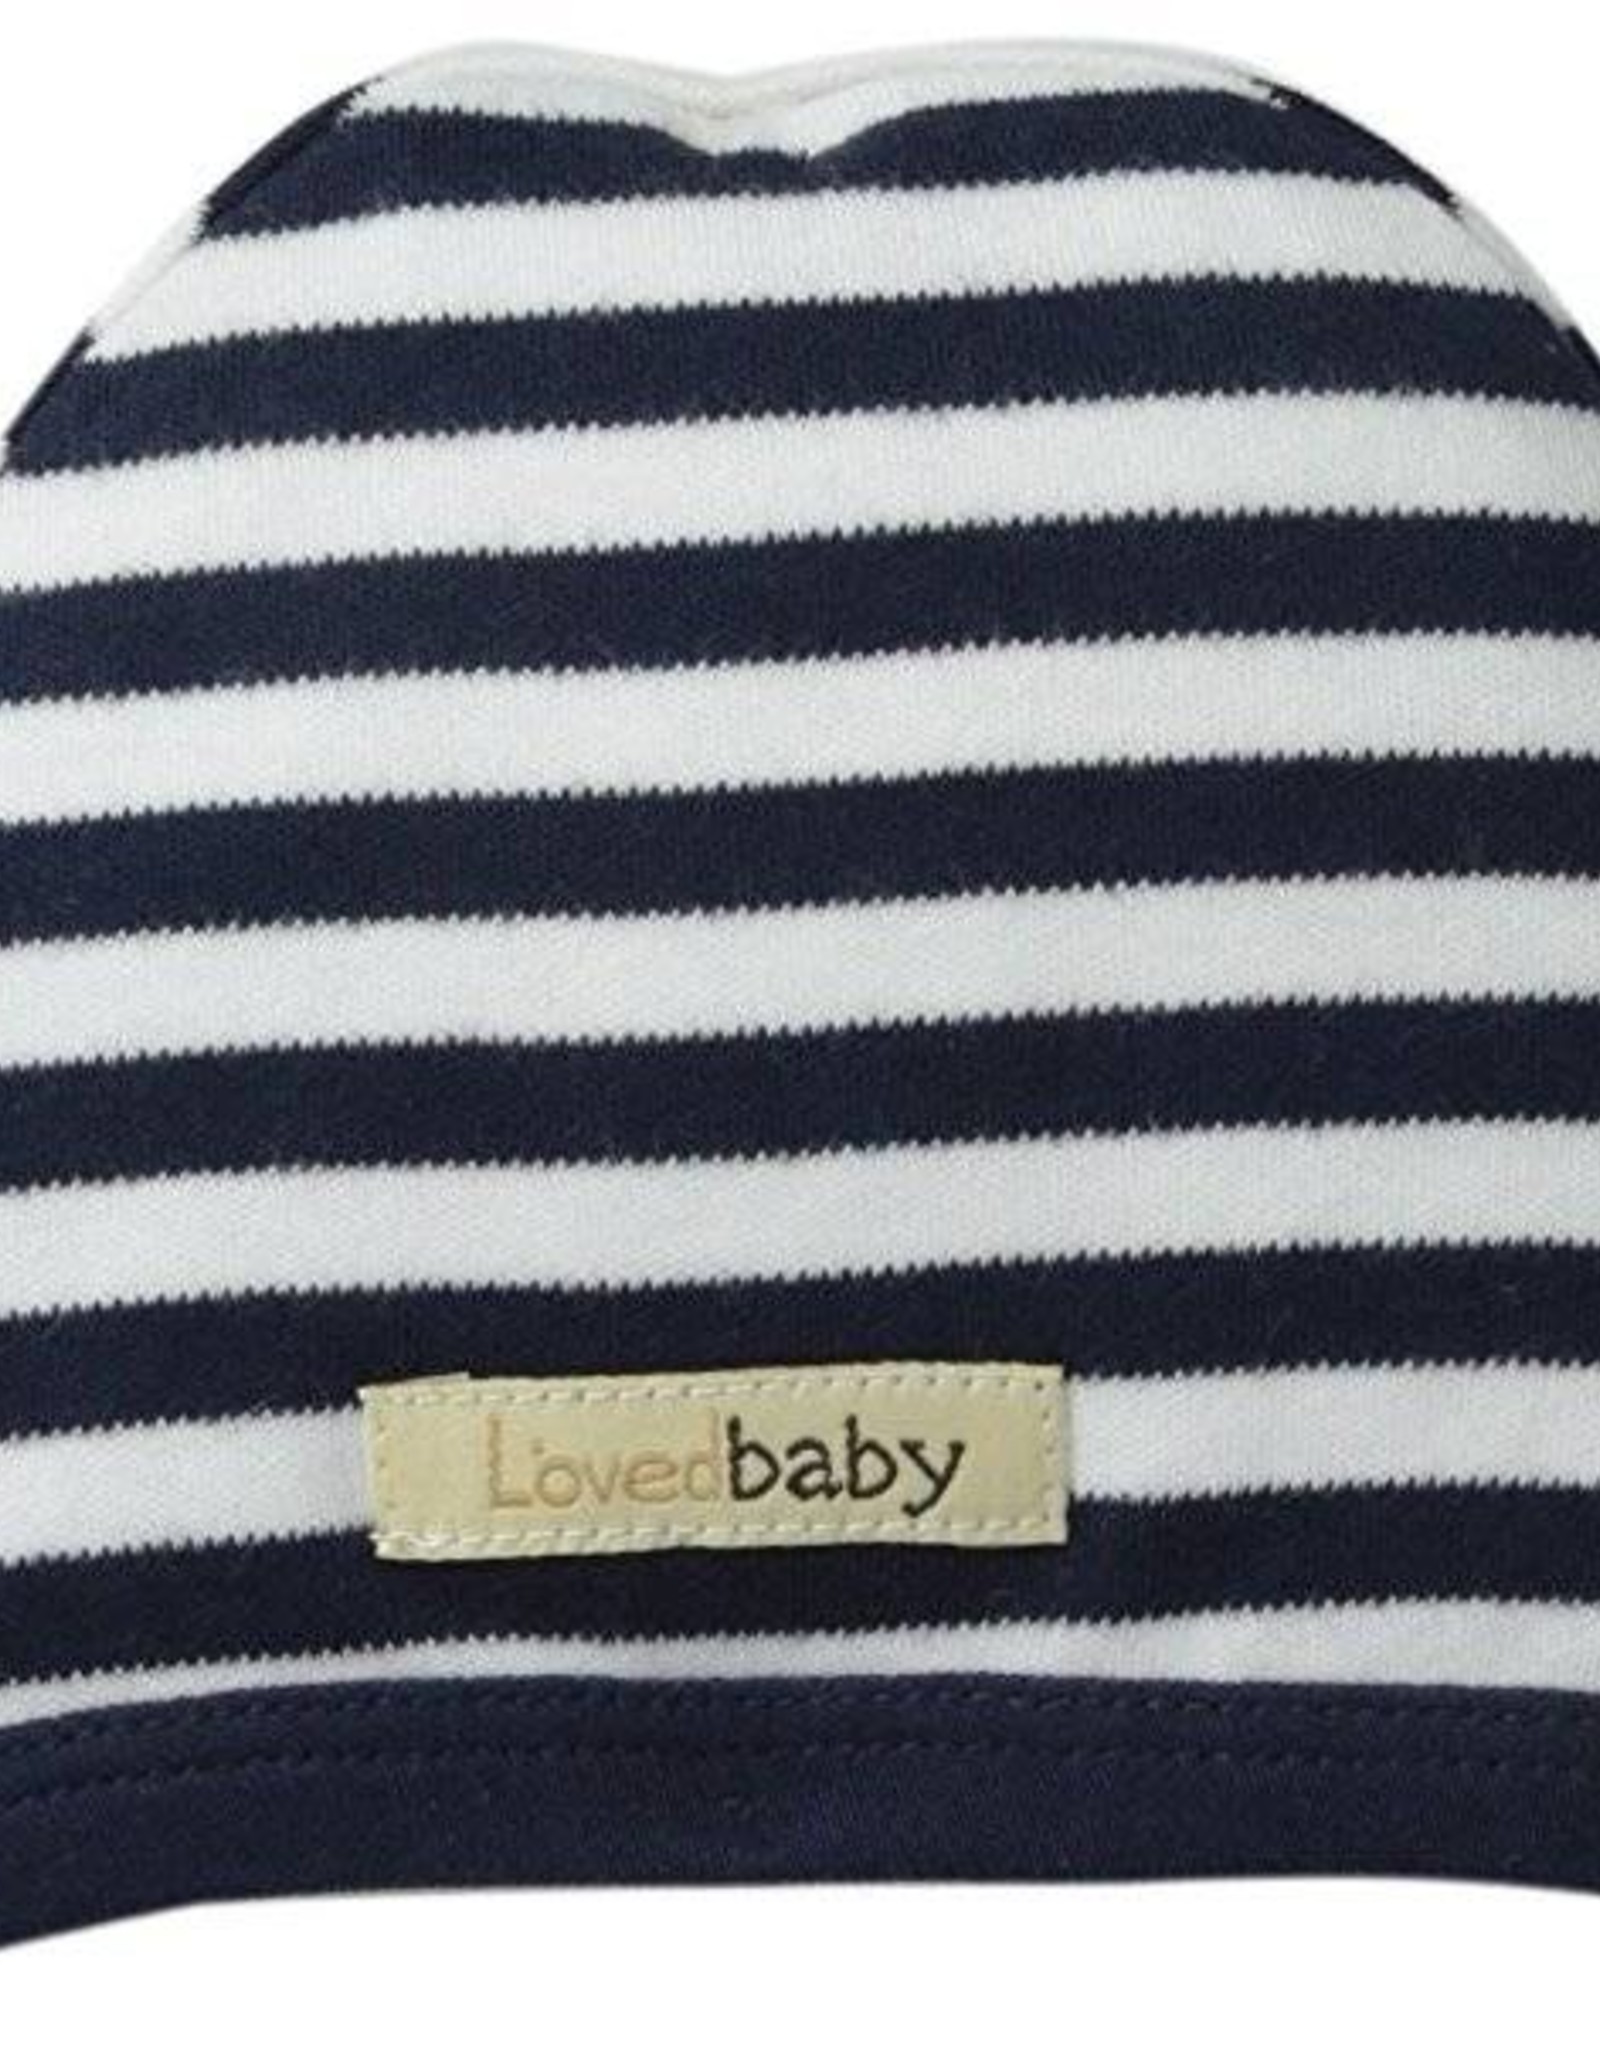 L'oved Baby L'oved Baby Organic Cute Cap